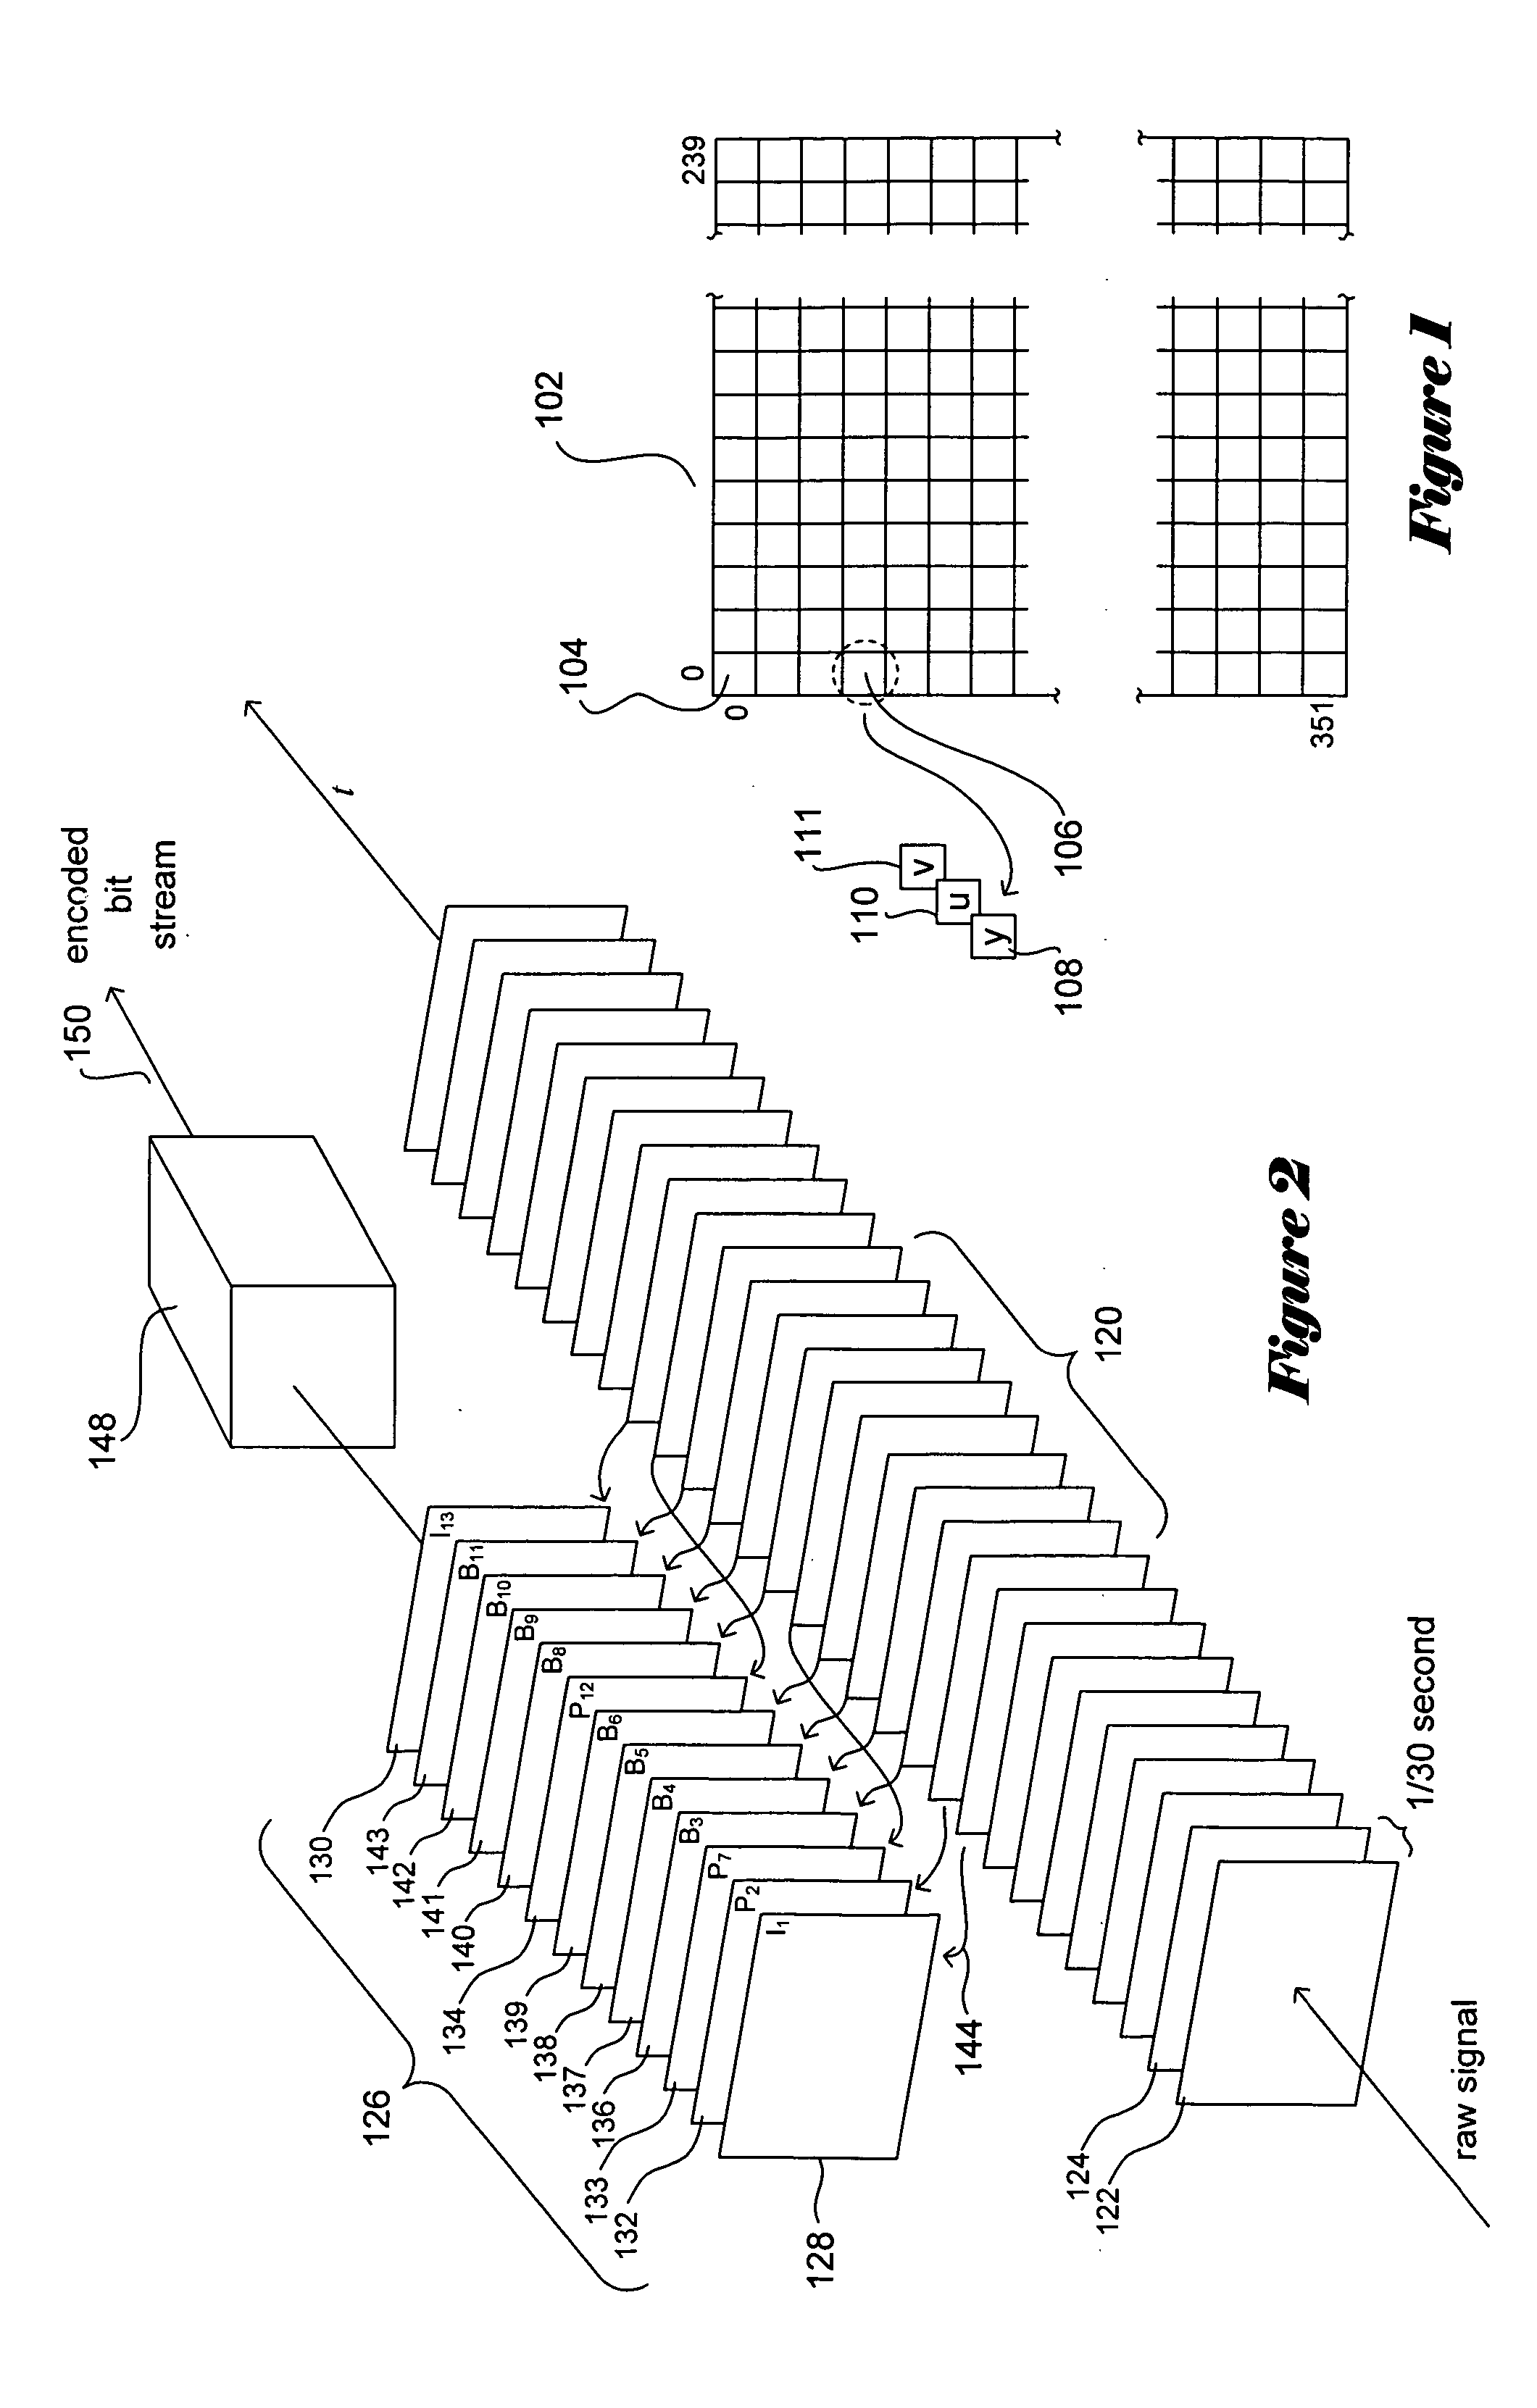 Robust and efficient compression/decompression providing for adjustable division of computational complexity between encoding/compression and decoding/decompression